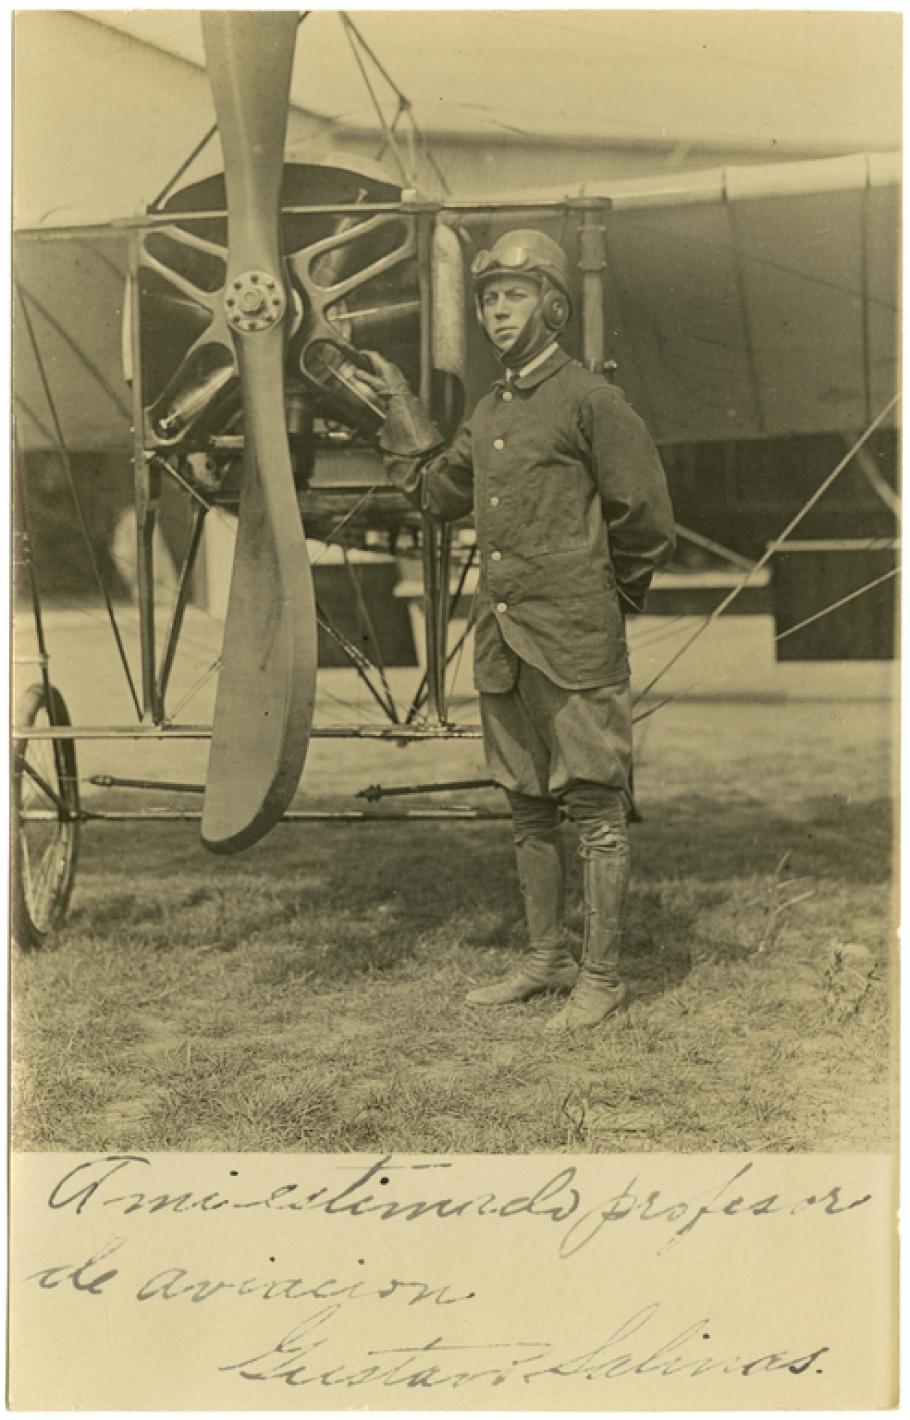 Man stands to the right of a two-bladed propeller with the blades running from the sky to the ground. He is wearing a leather cap with goggles pushed up over the cap and a button down jacket.